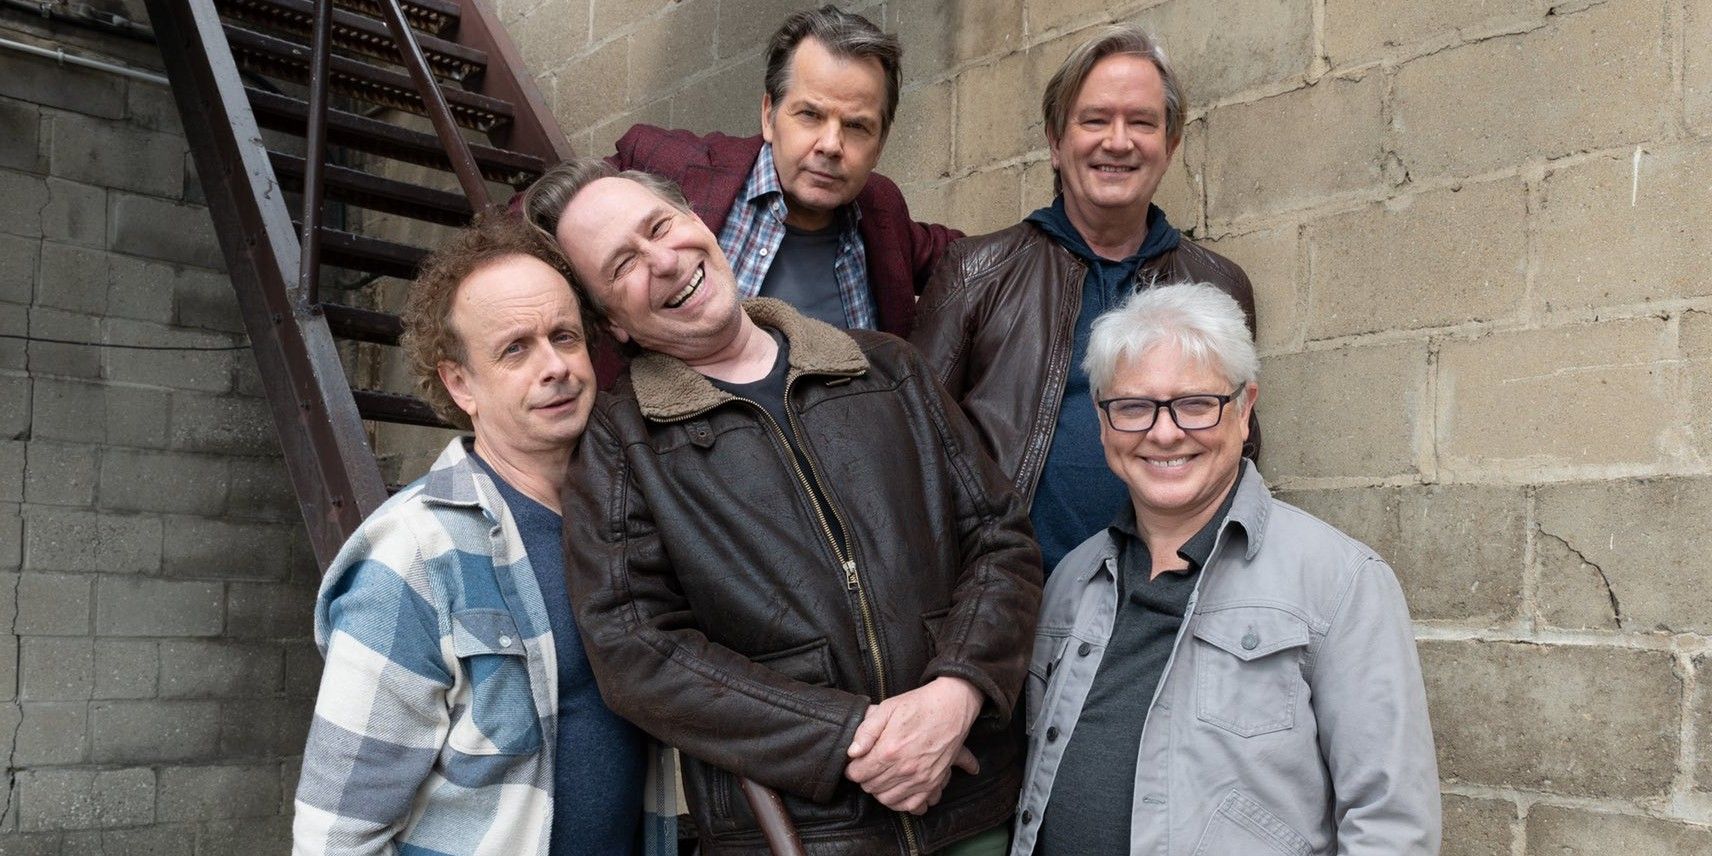 Kids in the Hall reunion show happening at Amazon